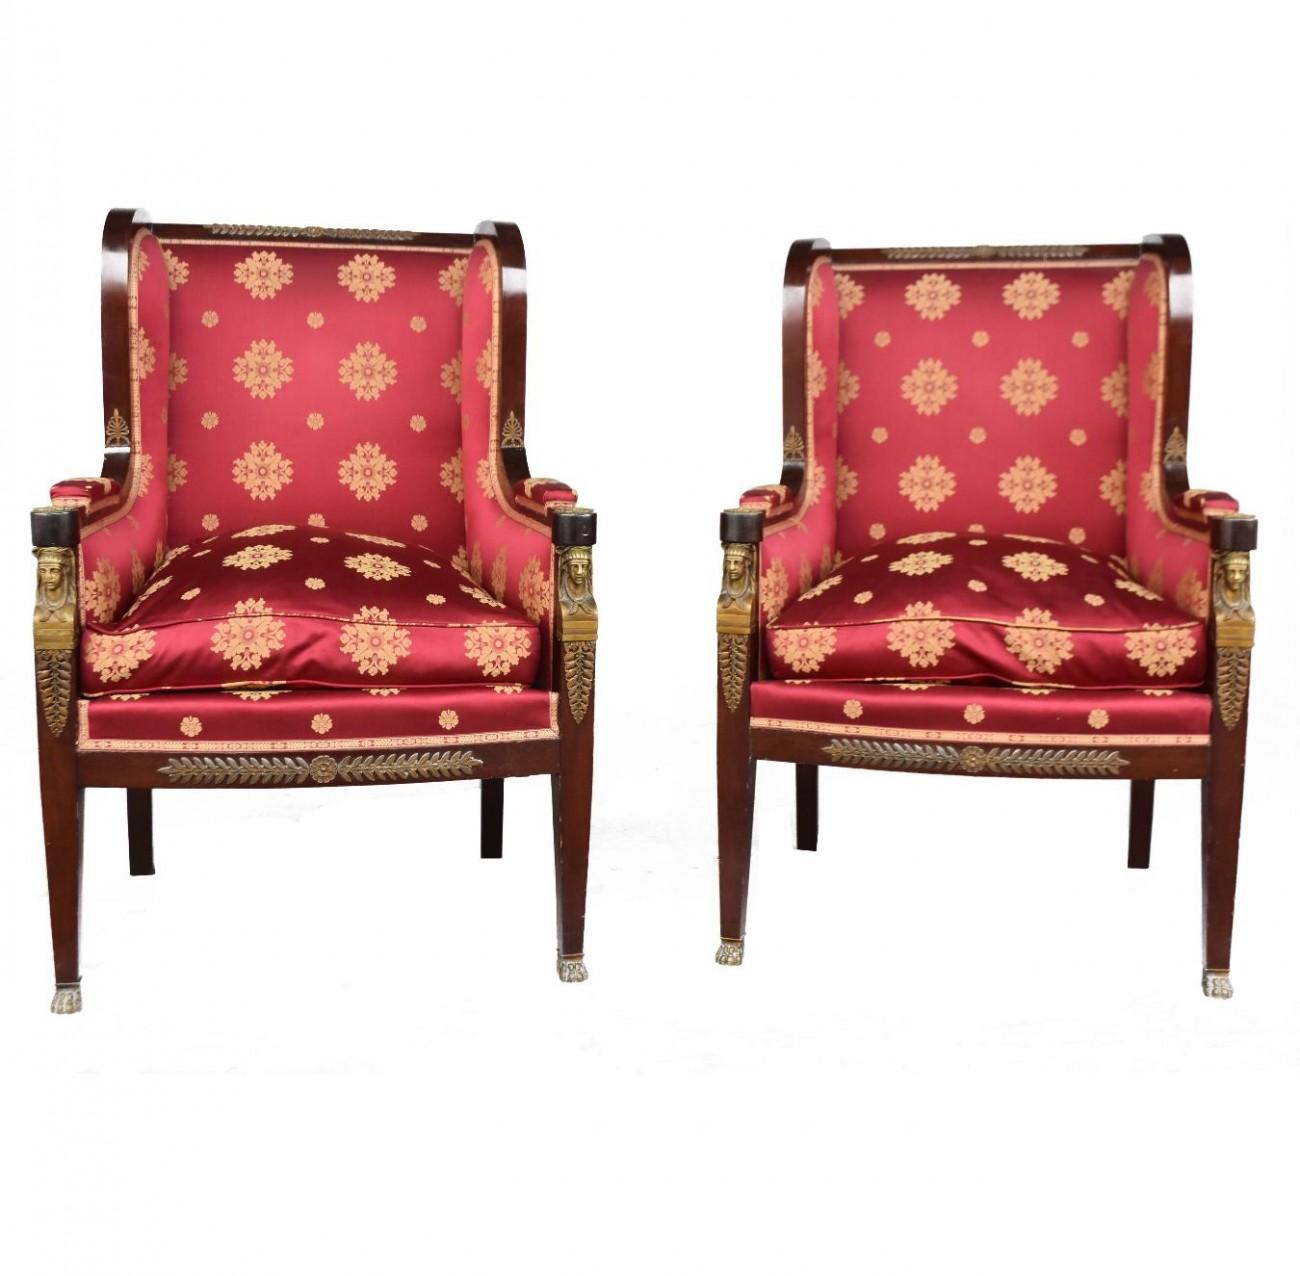 Late 19th century Empire style mahogany lounge golden bronze upholstered silk. 2 chairs. 4 armchairs. 1 sofa.
Dimension Bergere chairs 41.73 in H 26.37 in W 21.65 in D
Dimension chairs 38.18 in H 38.18 in W 21.65 in D
Dimension bench 38.18 in H